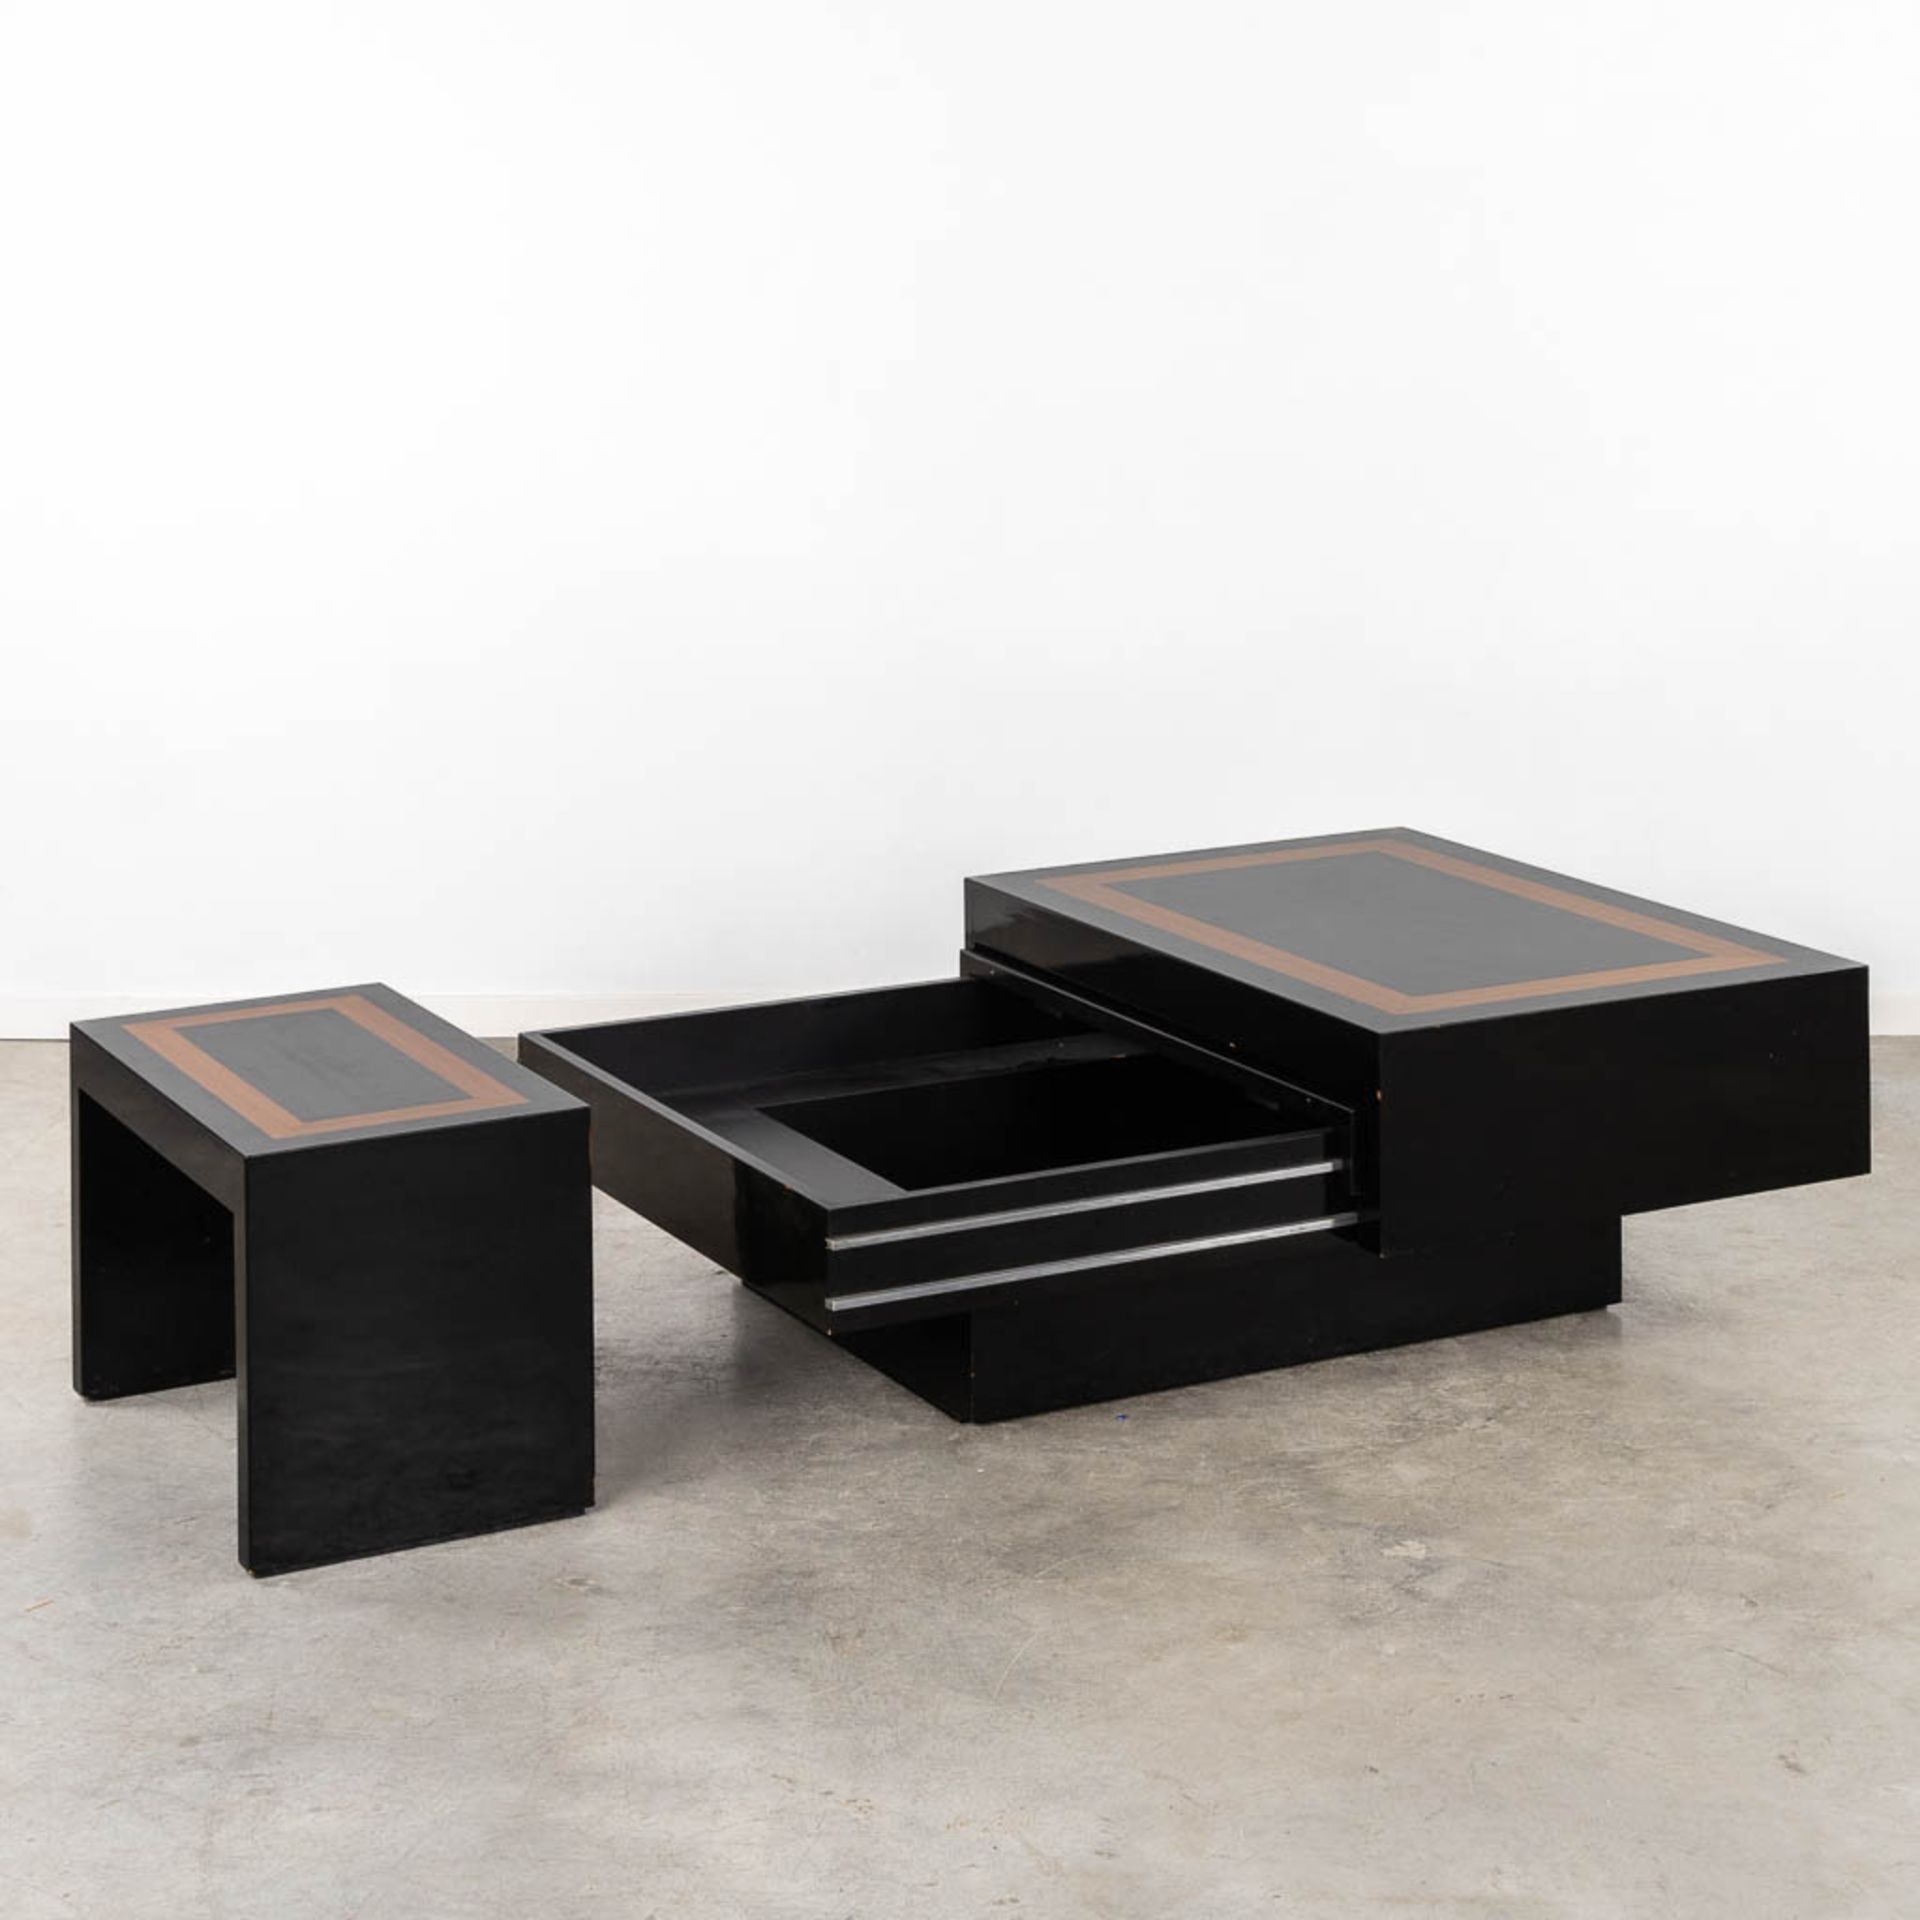 A slideable coffee table, added a bench. Lacquered wood. (L:110 x W:145 x H:47 cm) - Image 4 of 9